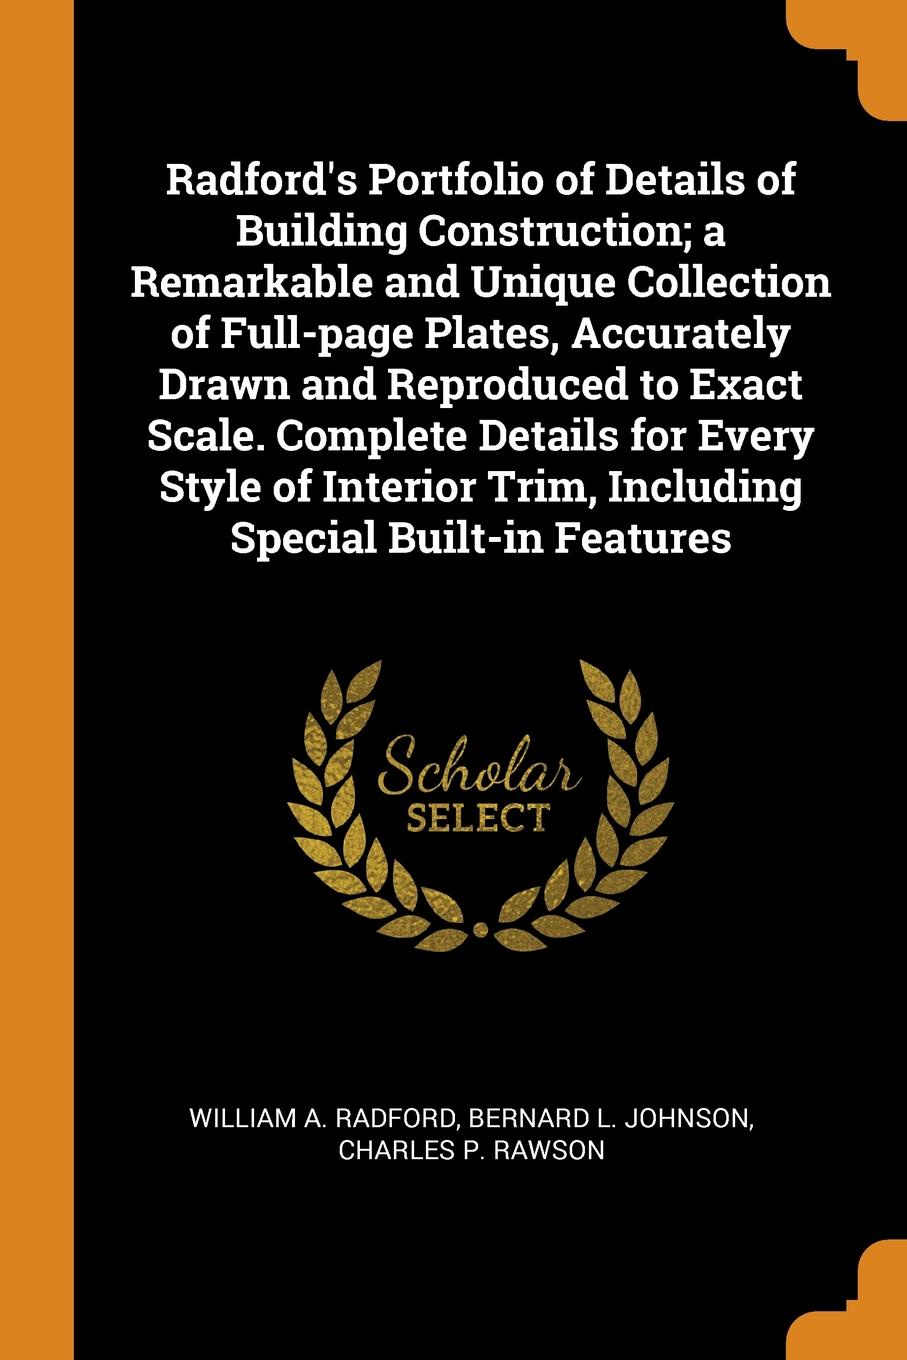 Radford.s Portfolio of Details of Building Construction; a Remarkable and Unique Collection of Full-page Plates, Accurately Drawn and Reproduced to Exact Scale. Complete Details for Every Style of Interior Trim, Including Special Built-in Features